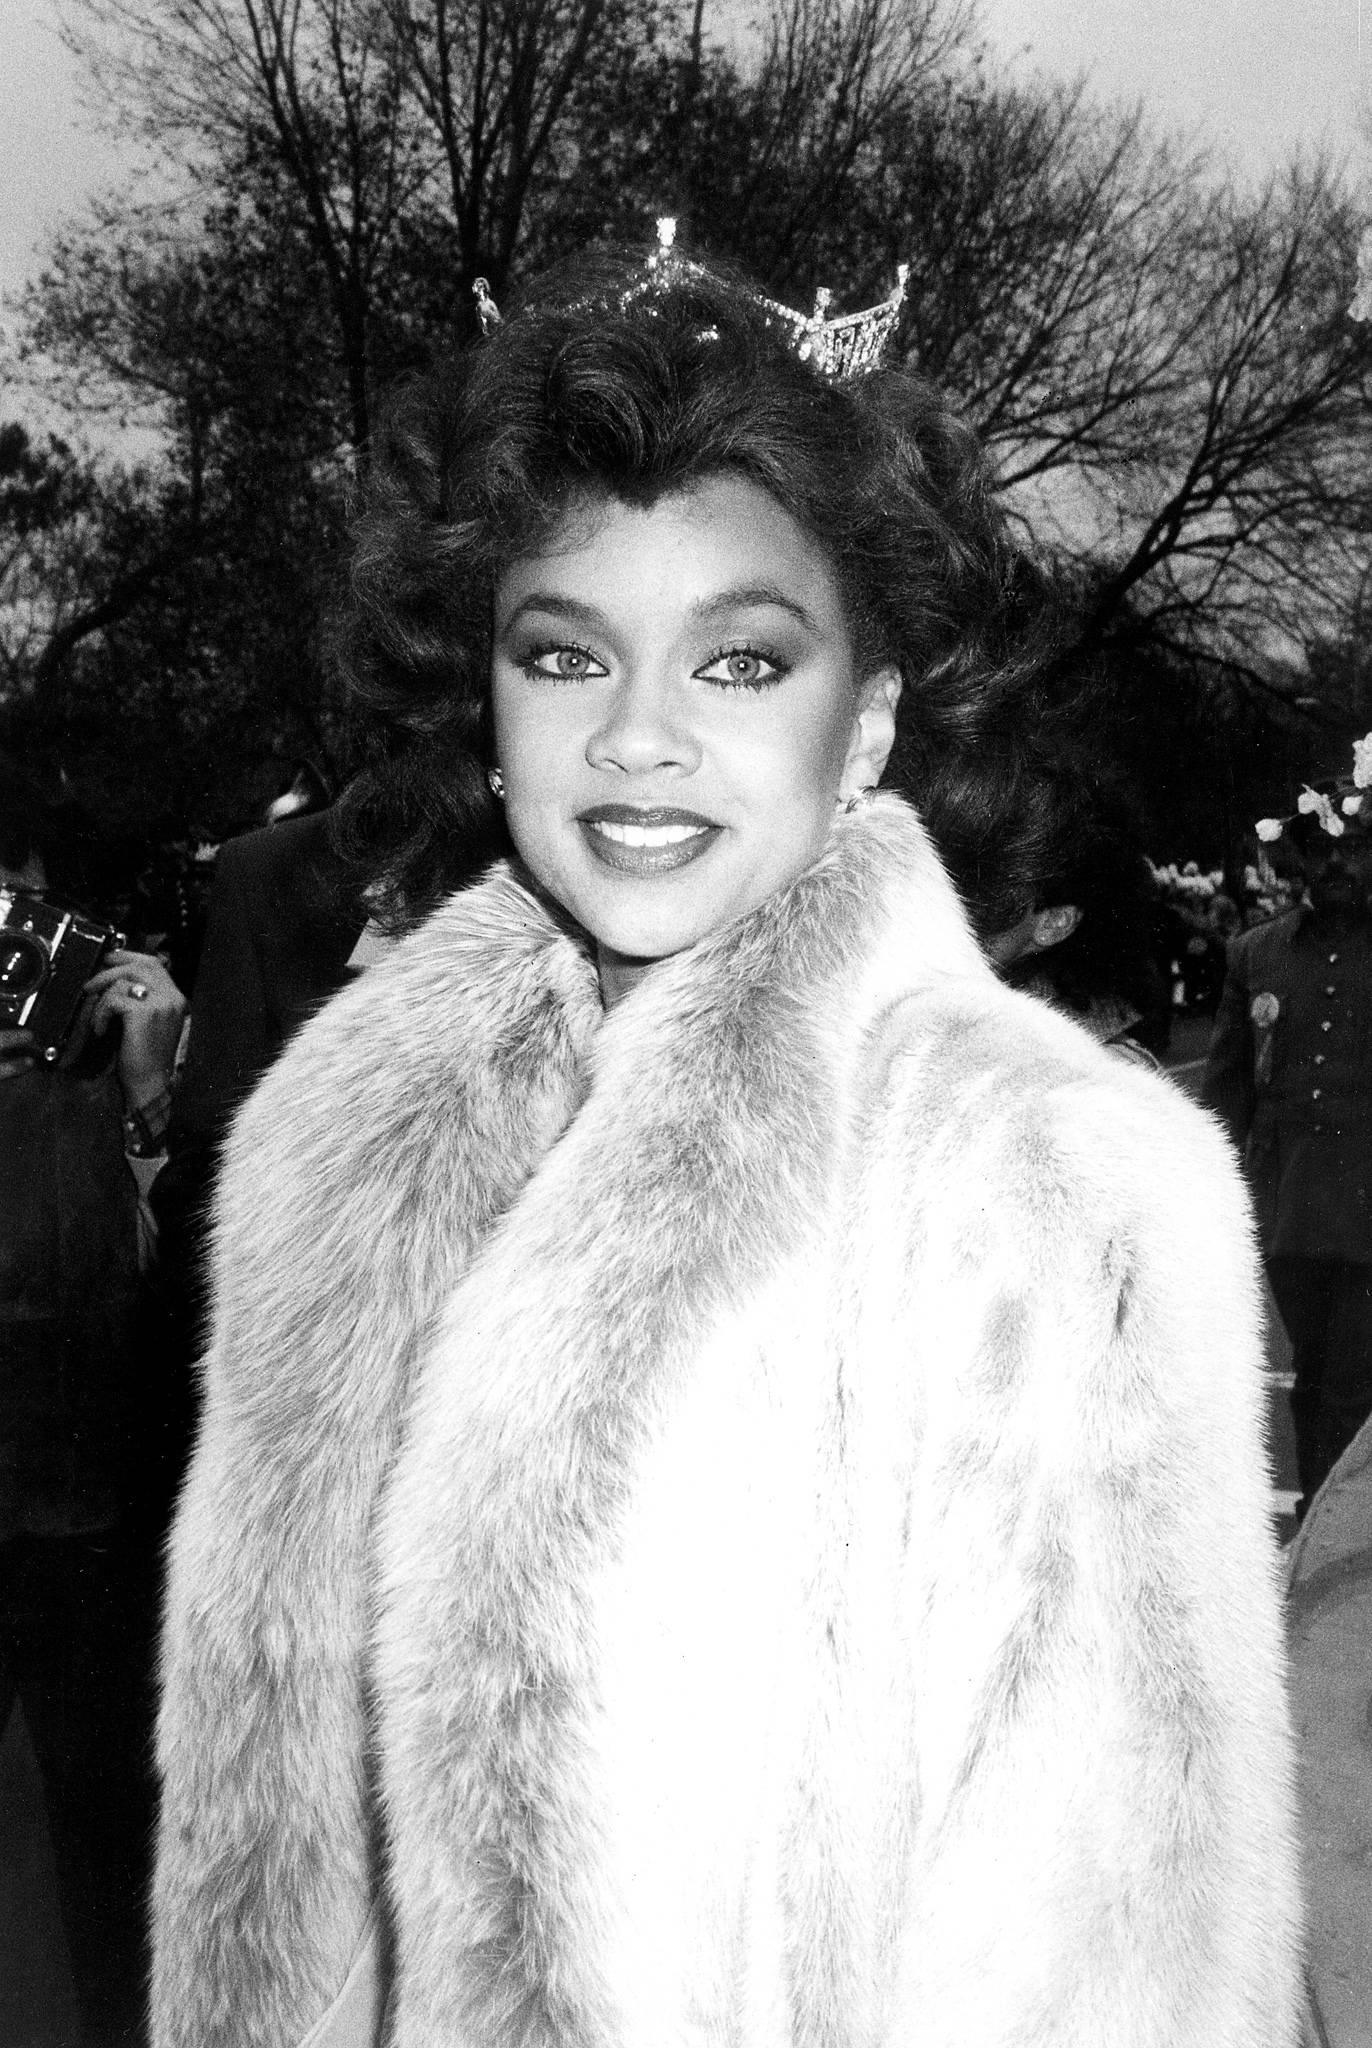 Vanessa Williams, Miss America 1984 - Talented actress and singer Vanessa Williams was the first African-American to win Miss America. Although she later resigned over a nude photo scandal, she is still officially recognized as the 1984 winner.(Photo: Everett Collection)